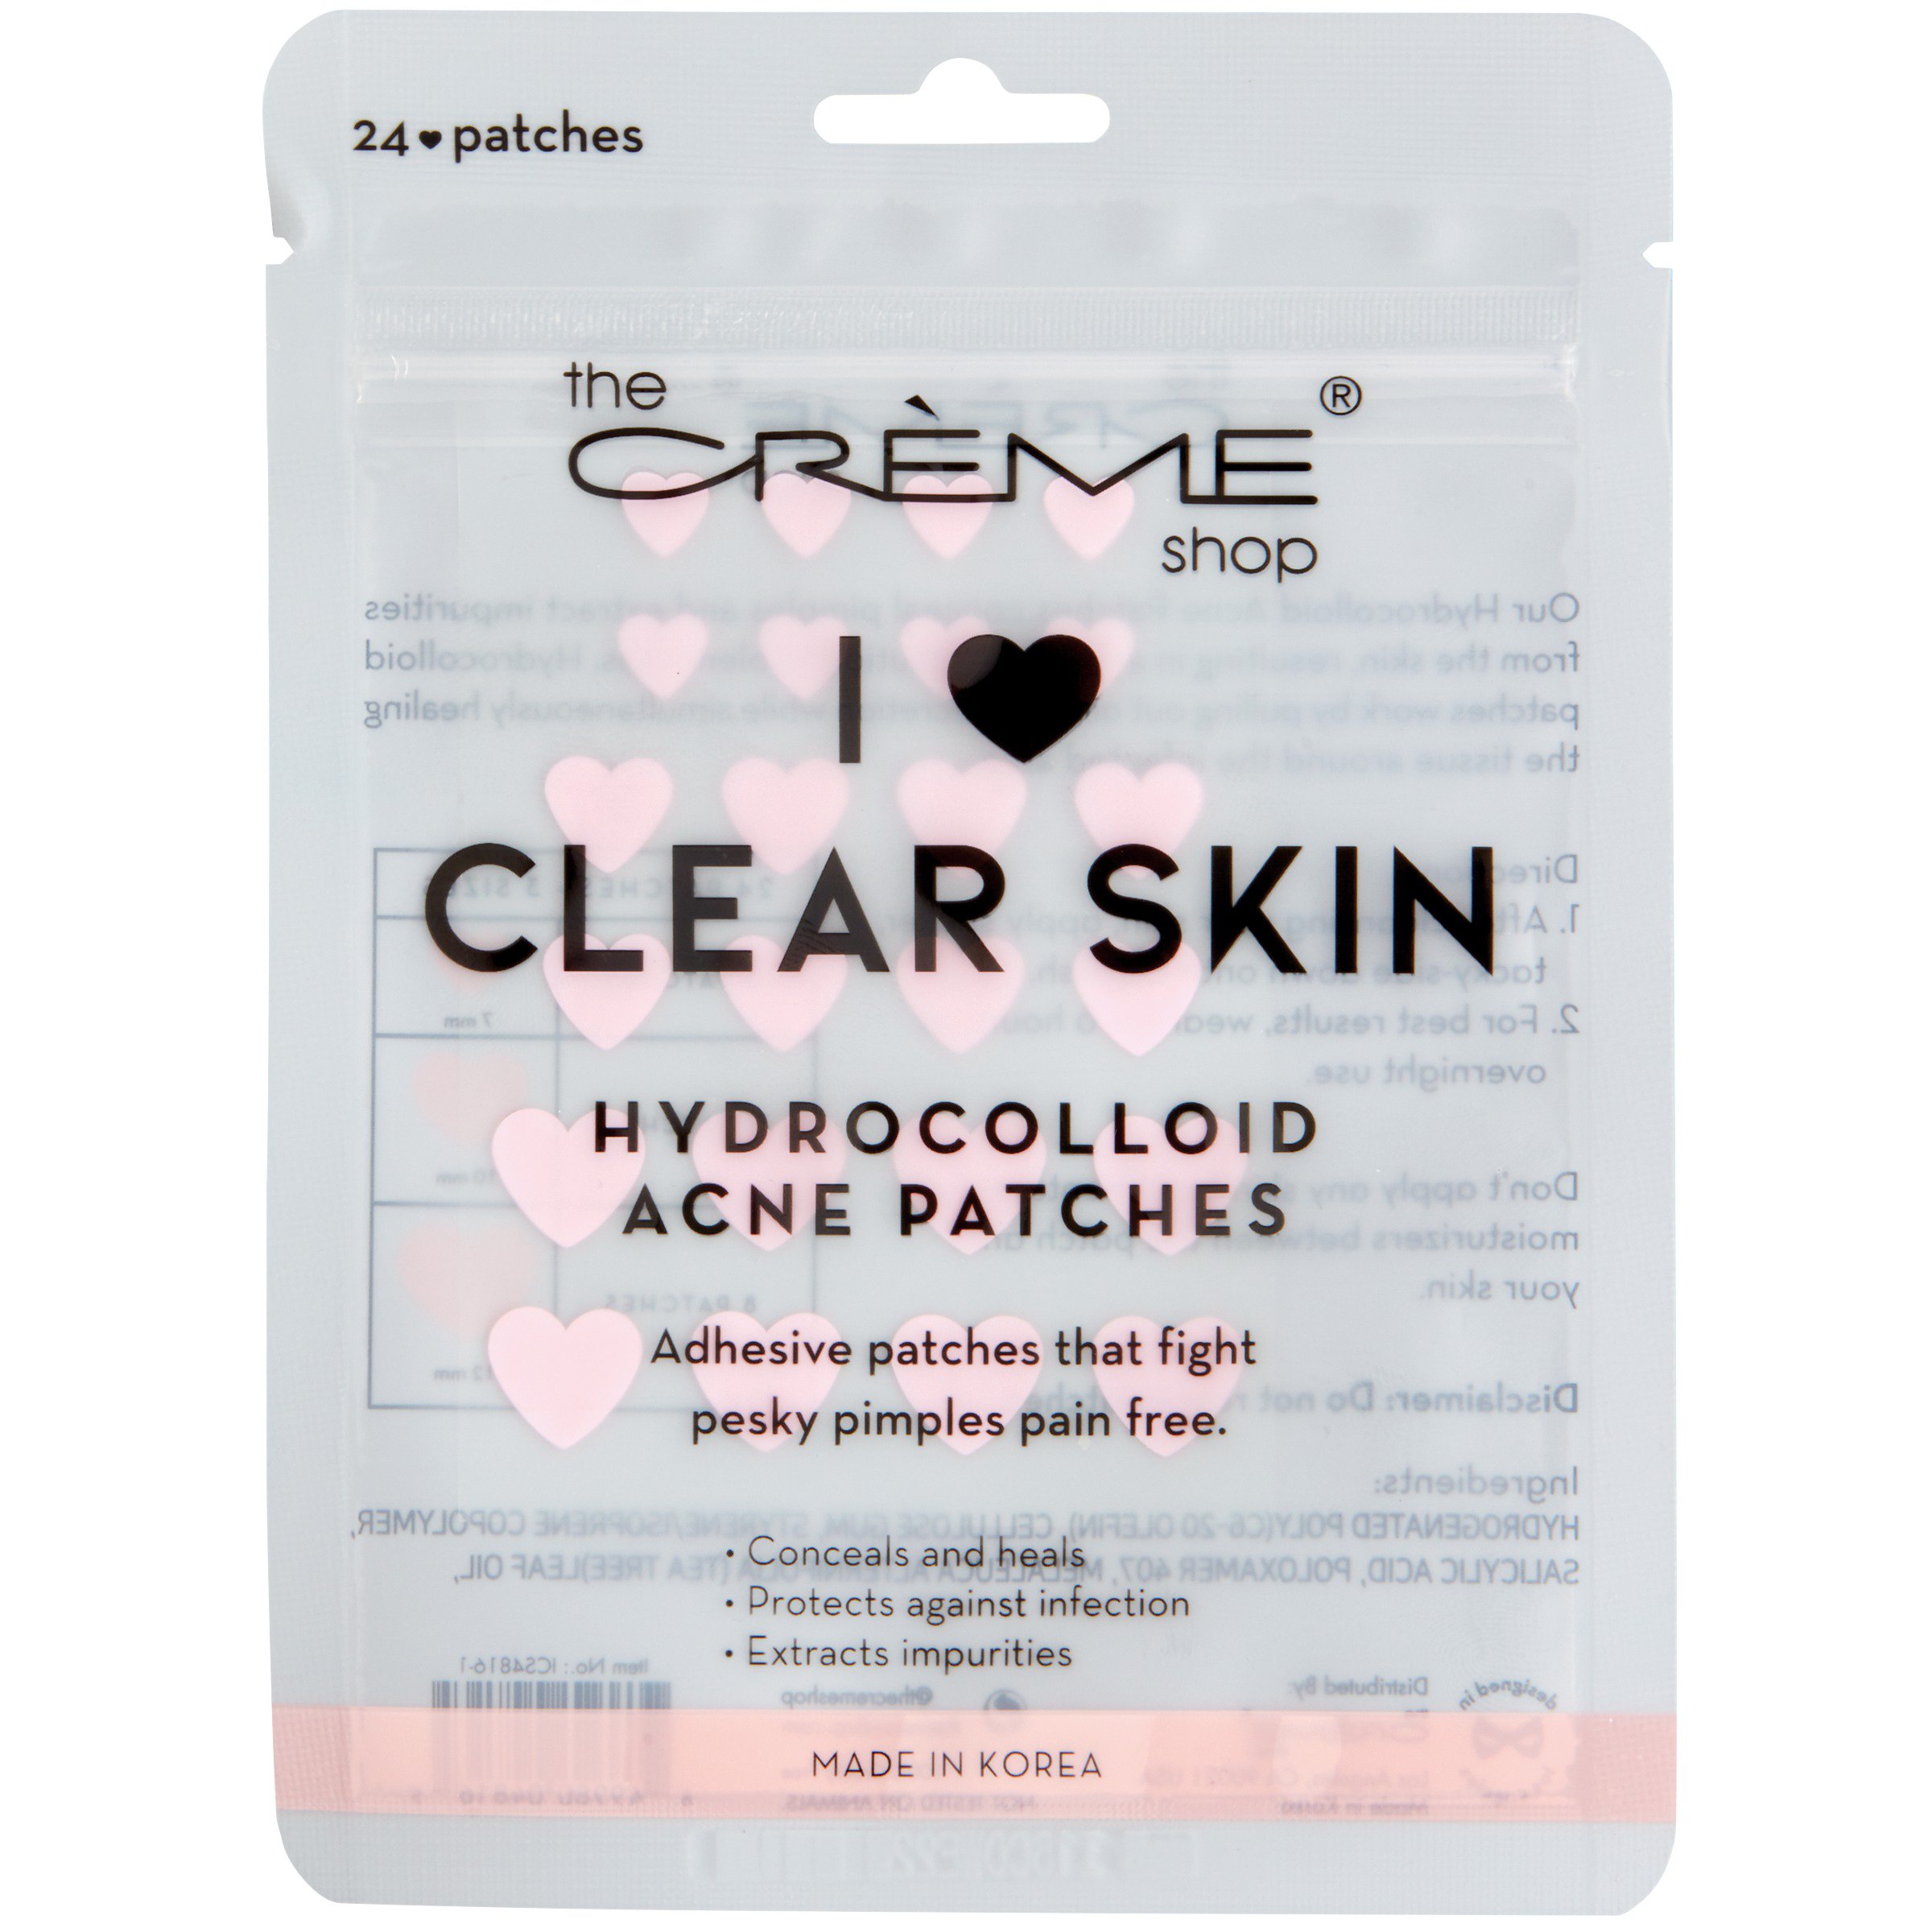 The Crème Shop I Heart Clear Skin Hydrocolloid Acne Patches Shop